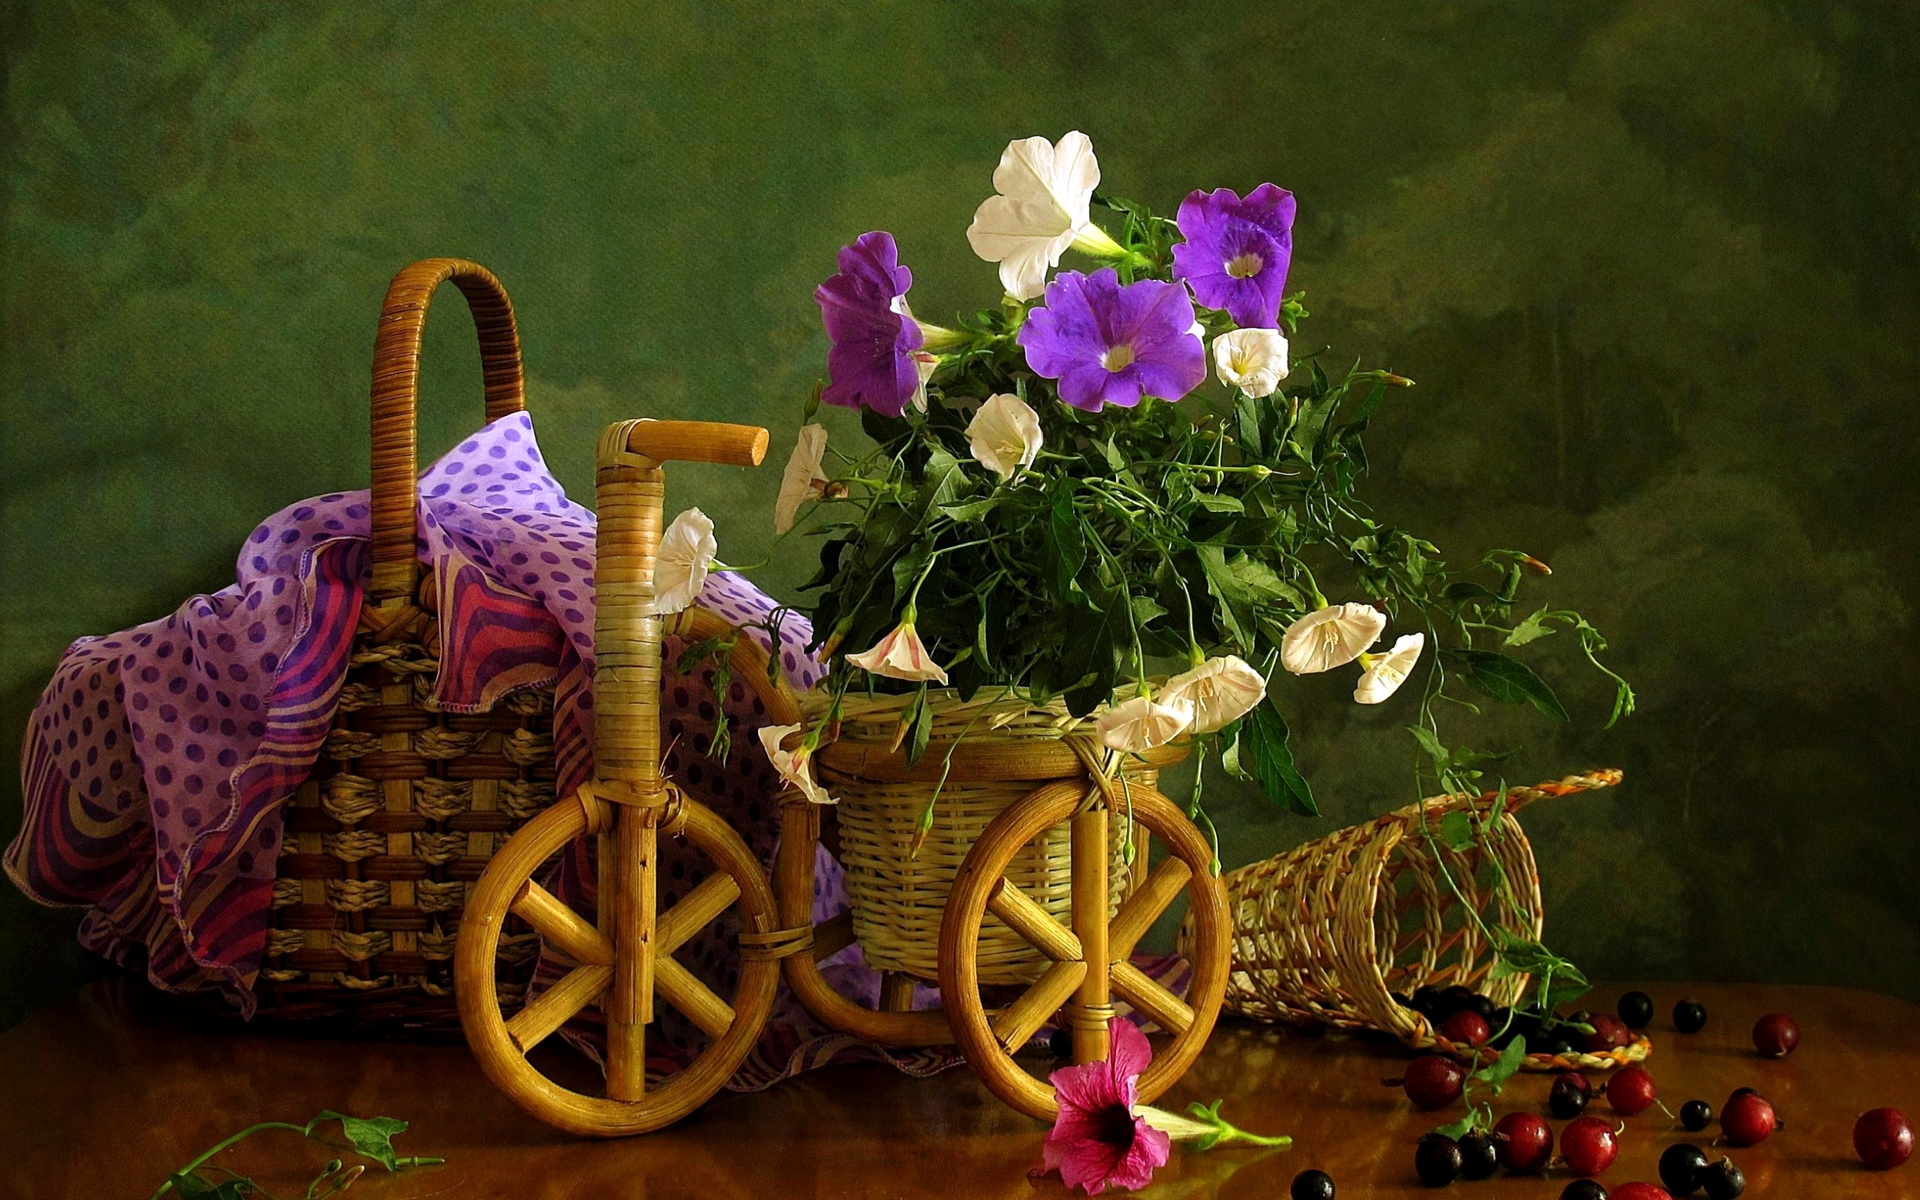 nature, Flowers, Petals, Still, Life, Country, Photography, Artistic, Berries, Basket, Fruit, Wood, Wheels, Bicycles, Decoration Wallpaper